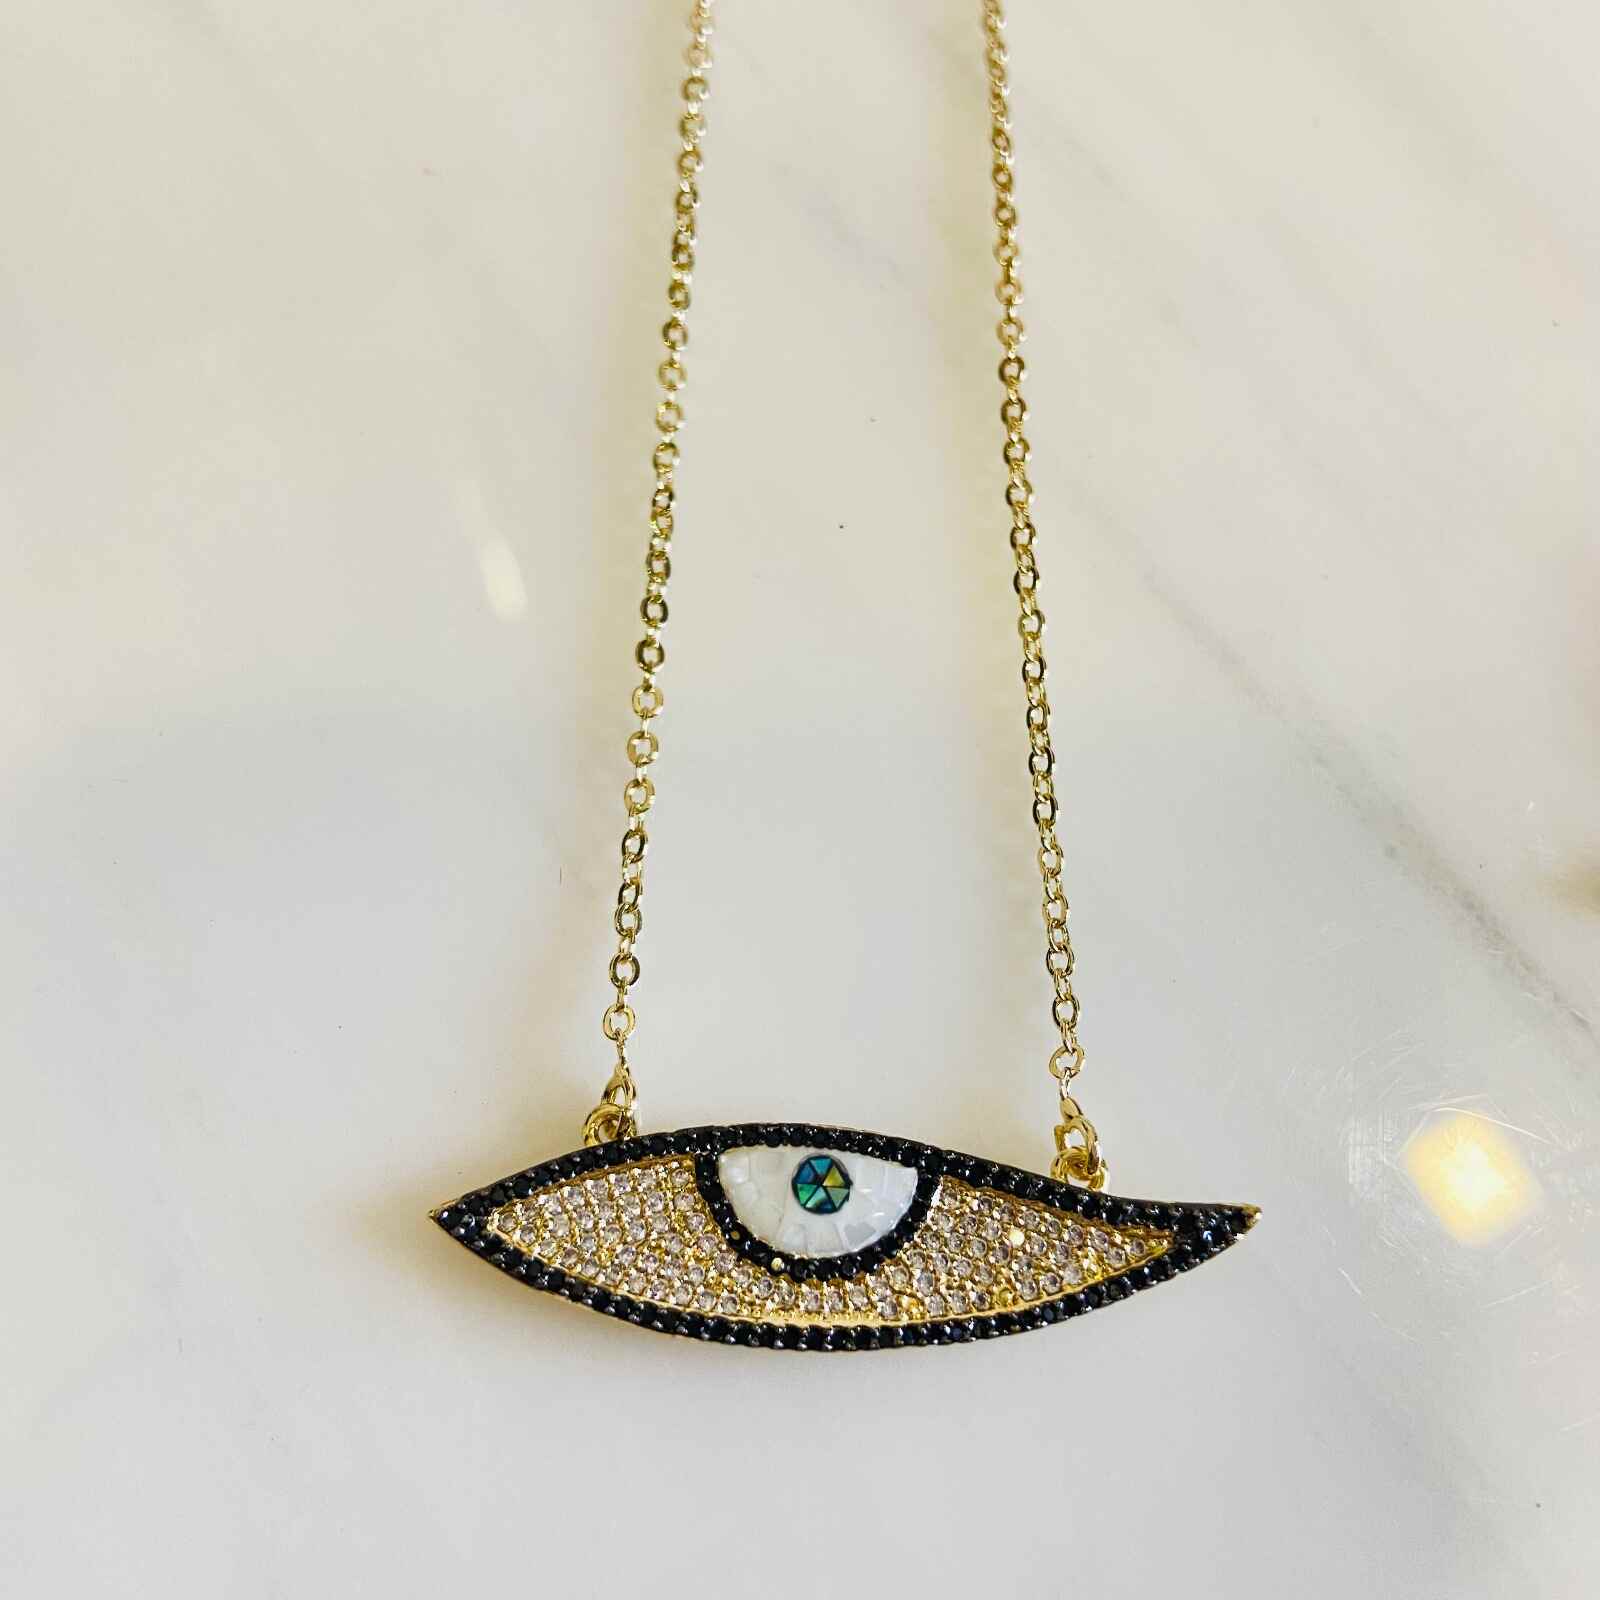 Blue Evil Eye Necklace – Ornaments and more